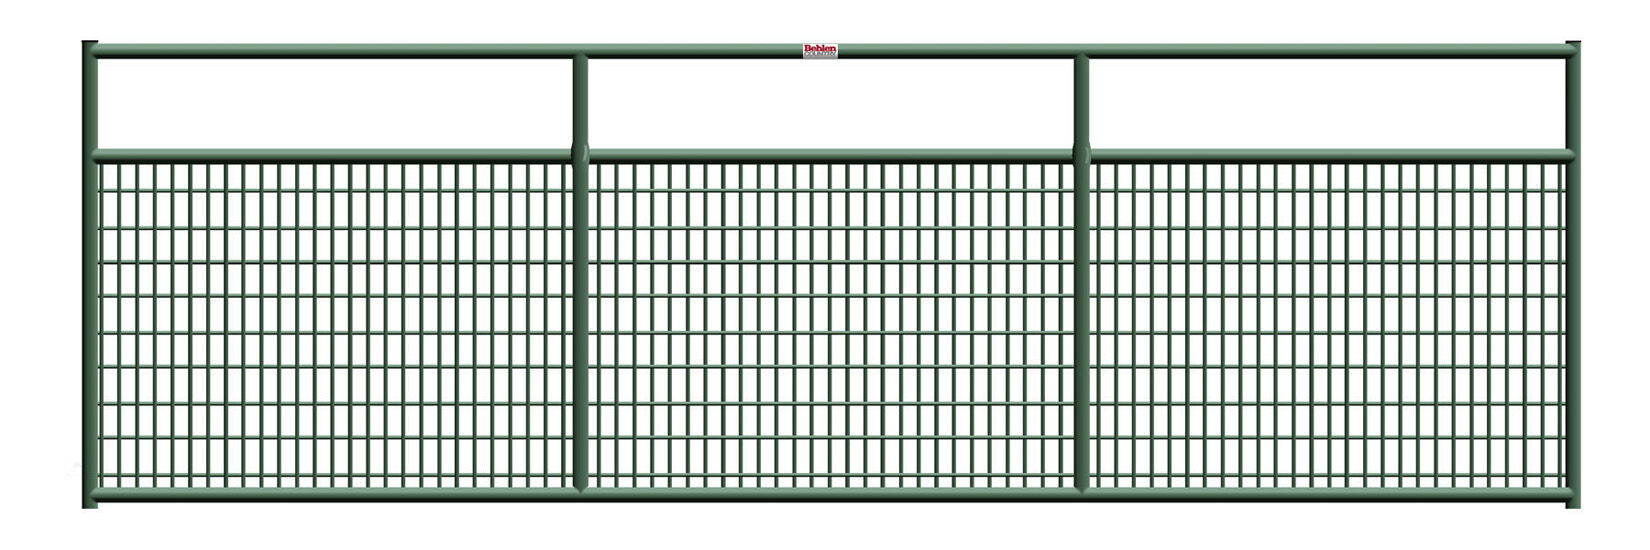 14 Wire-Filled Gate